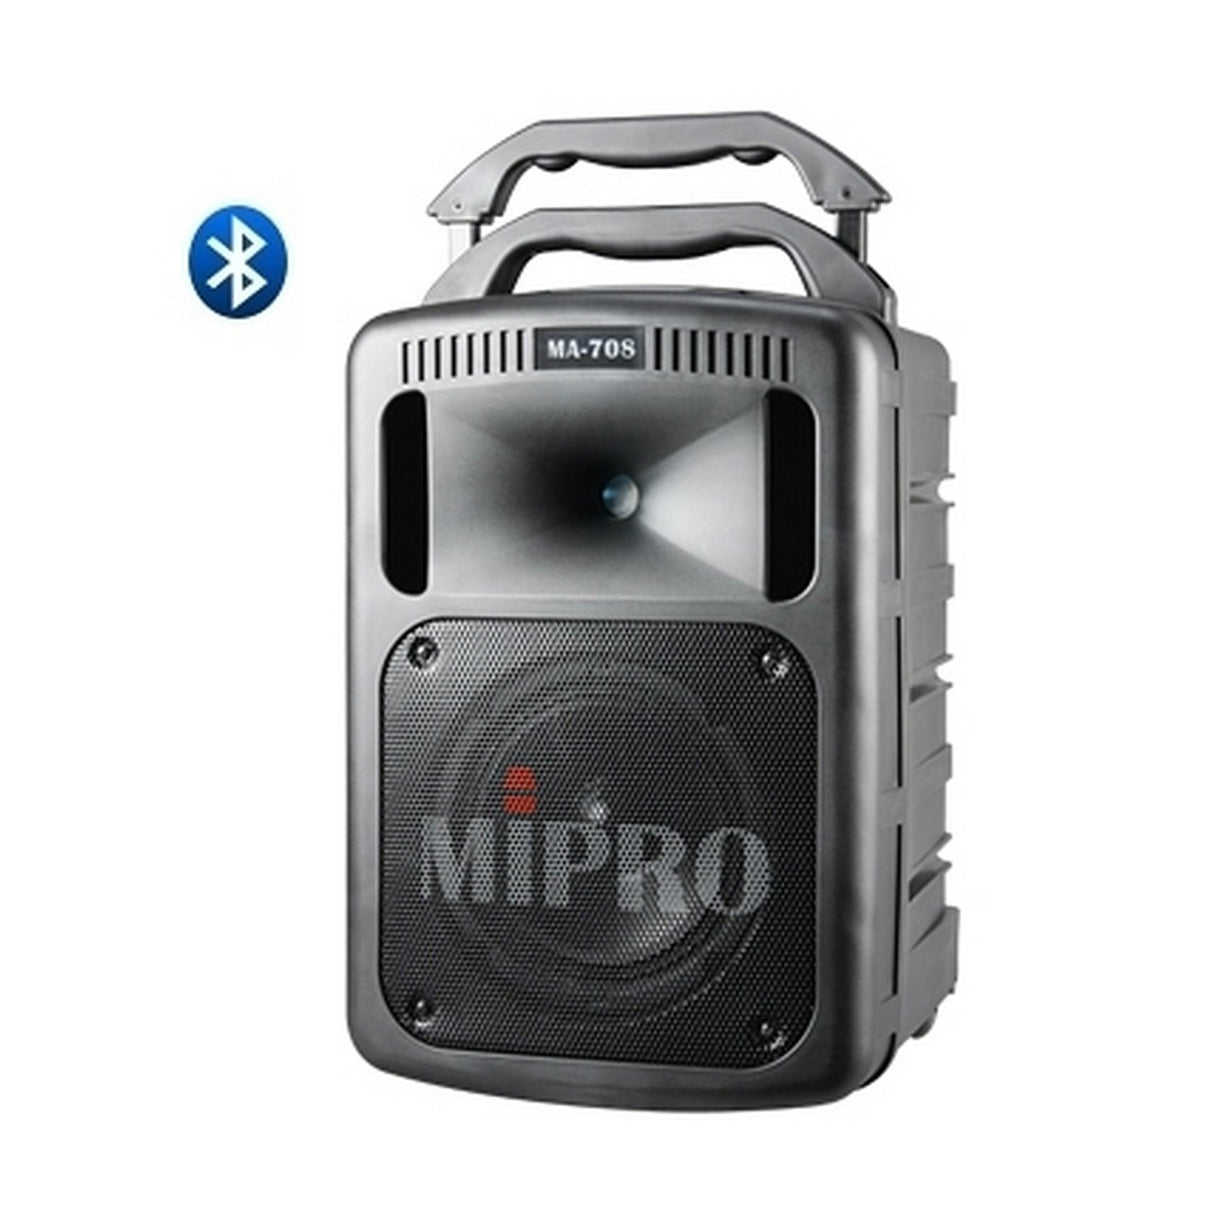 MIPRO MA-708PAB | Portable 190W PA Bluetooth System Black, Microphone Transmitter Not Included